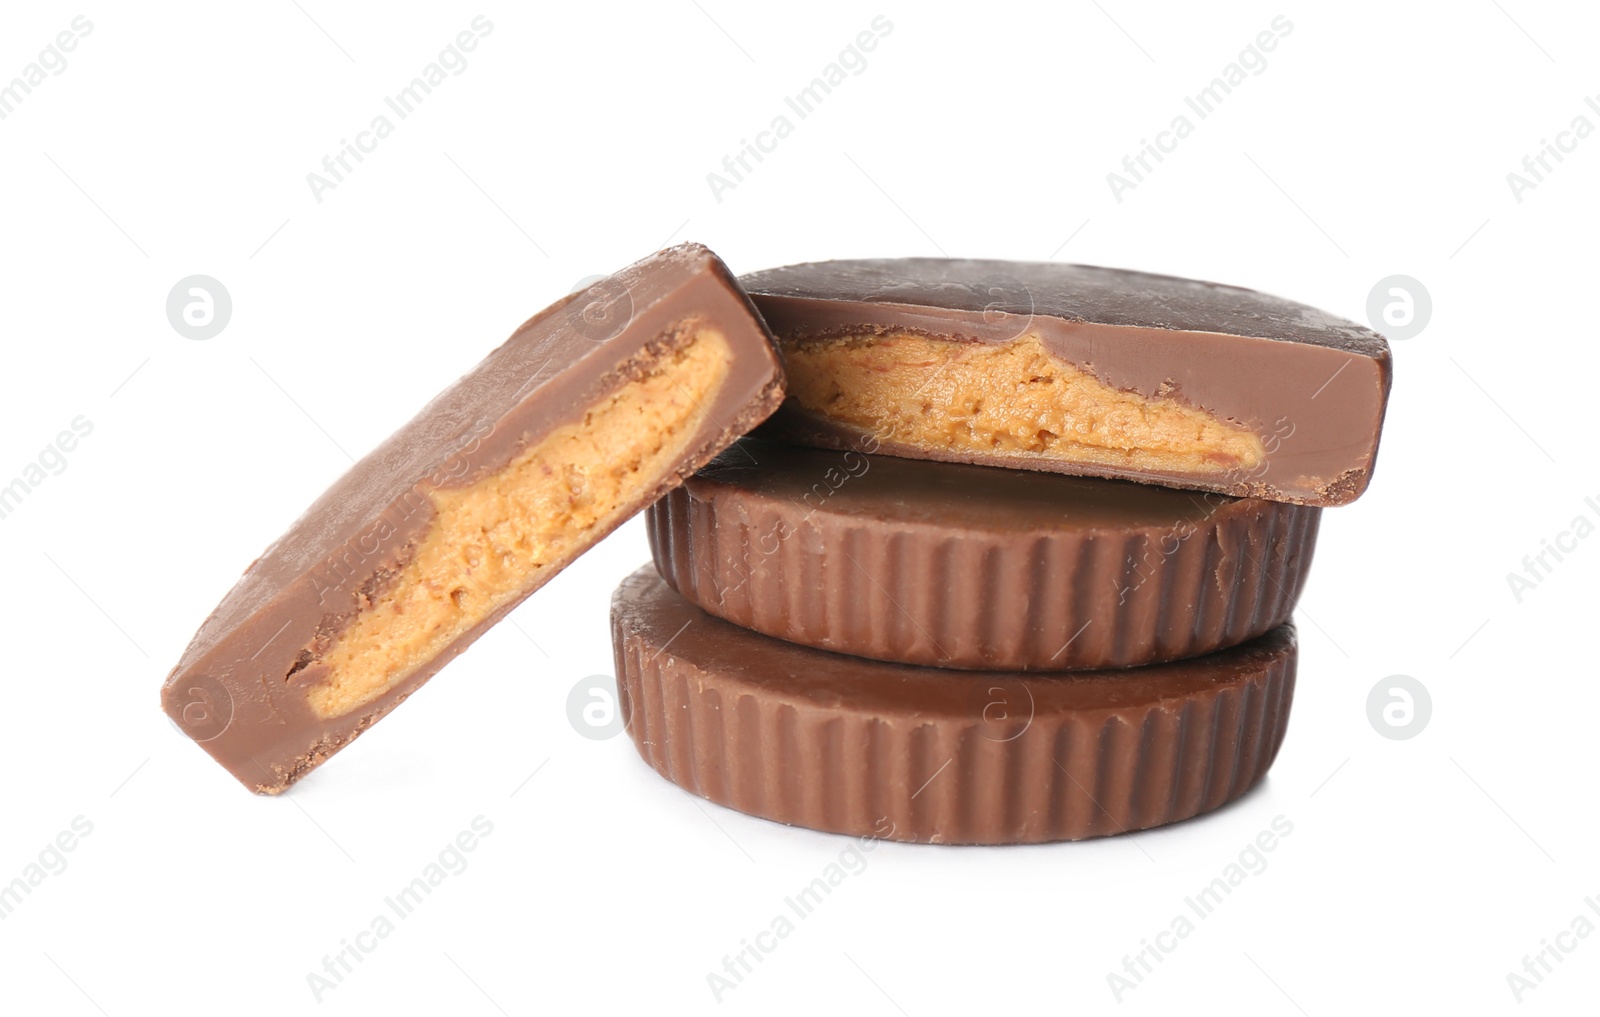 Photo of Cut and whole peanut butter cups isolated on white